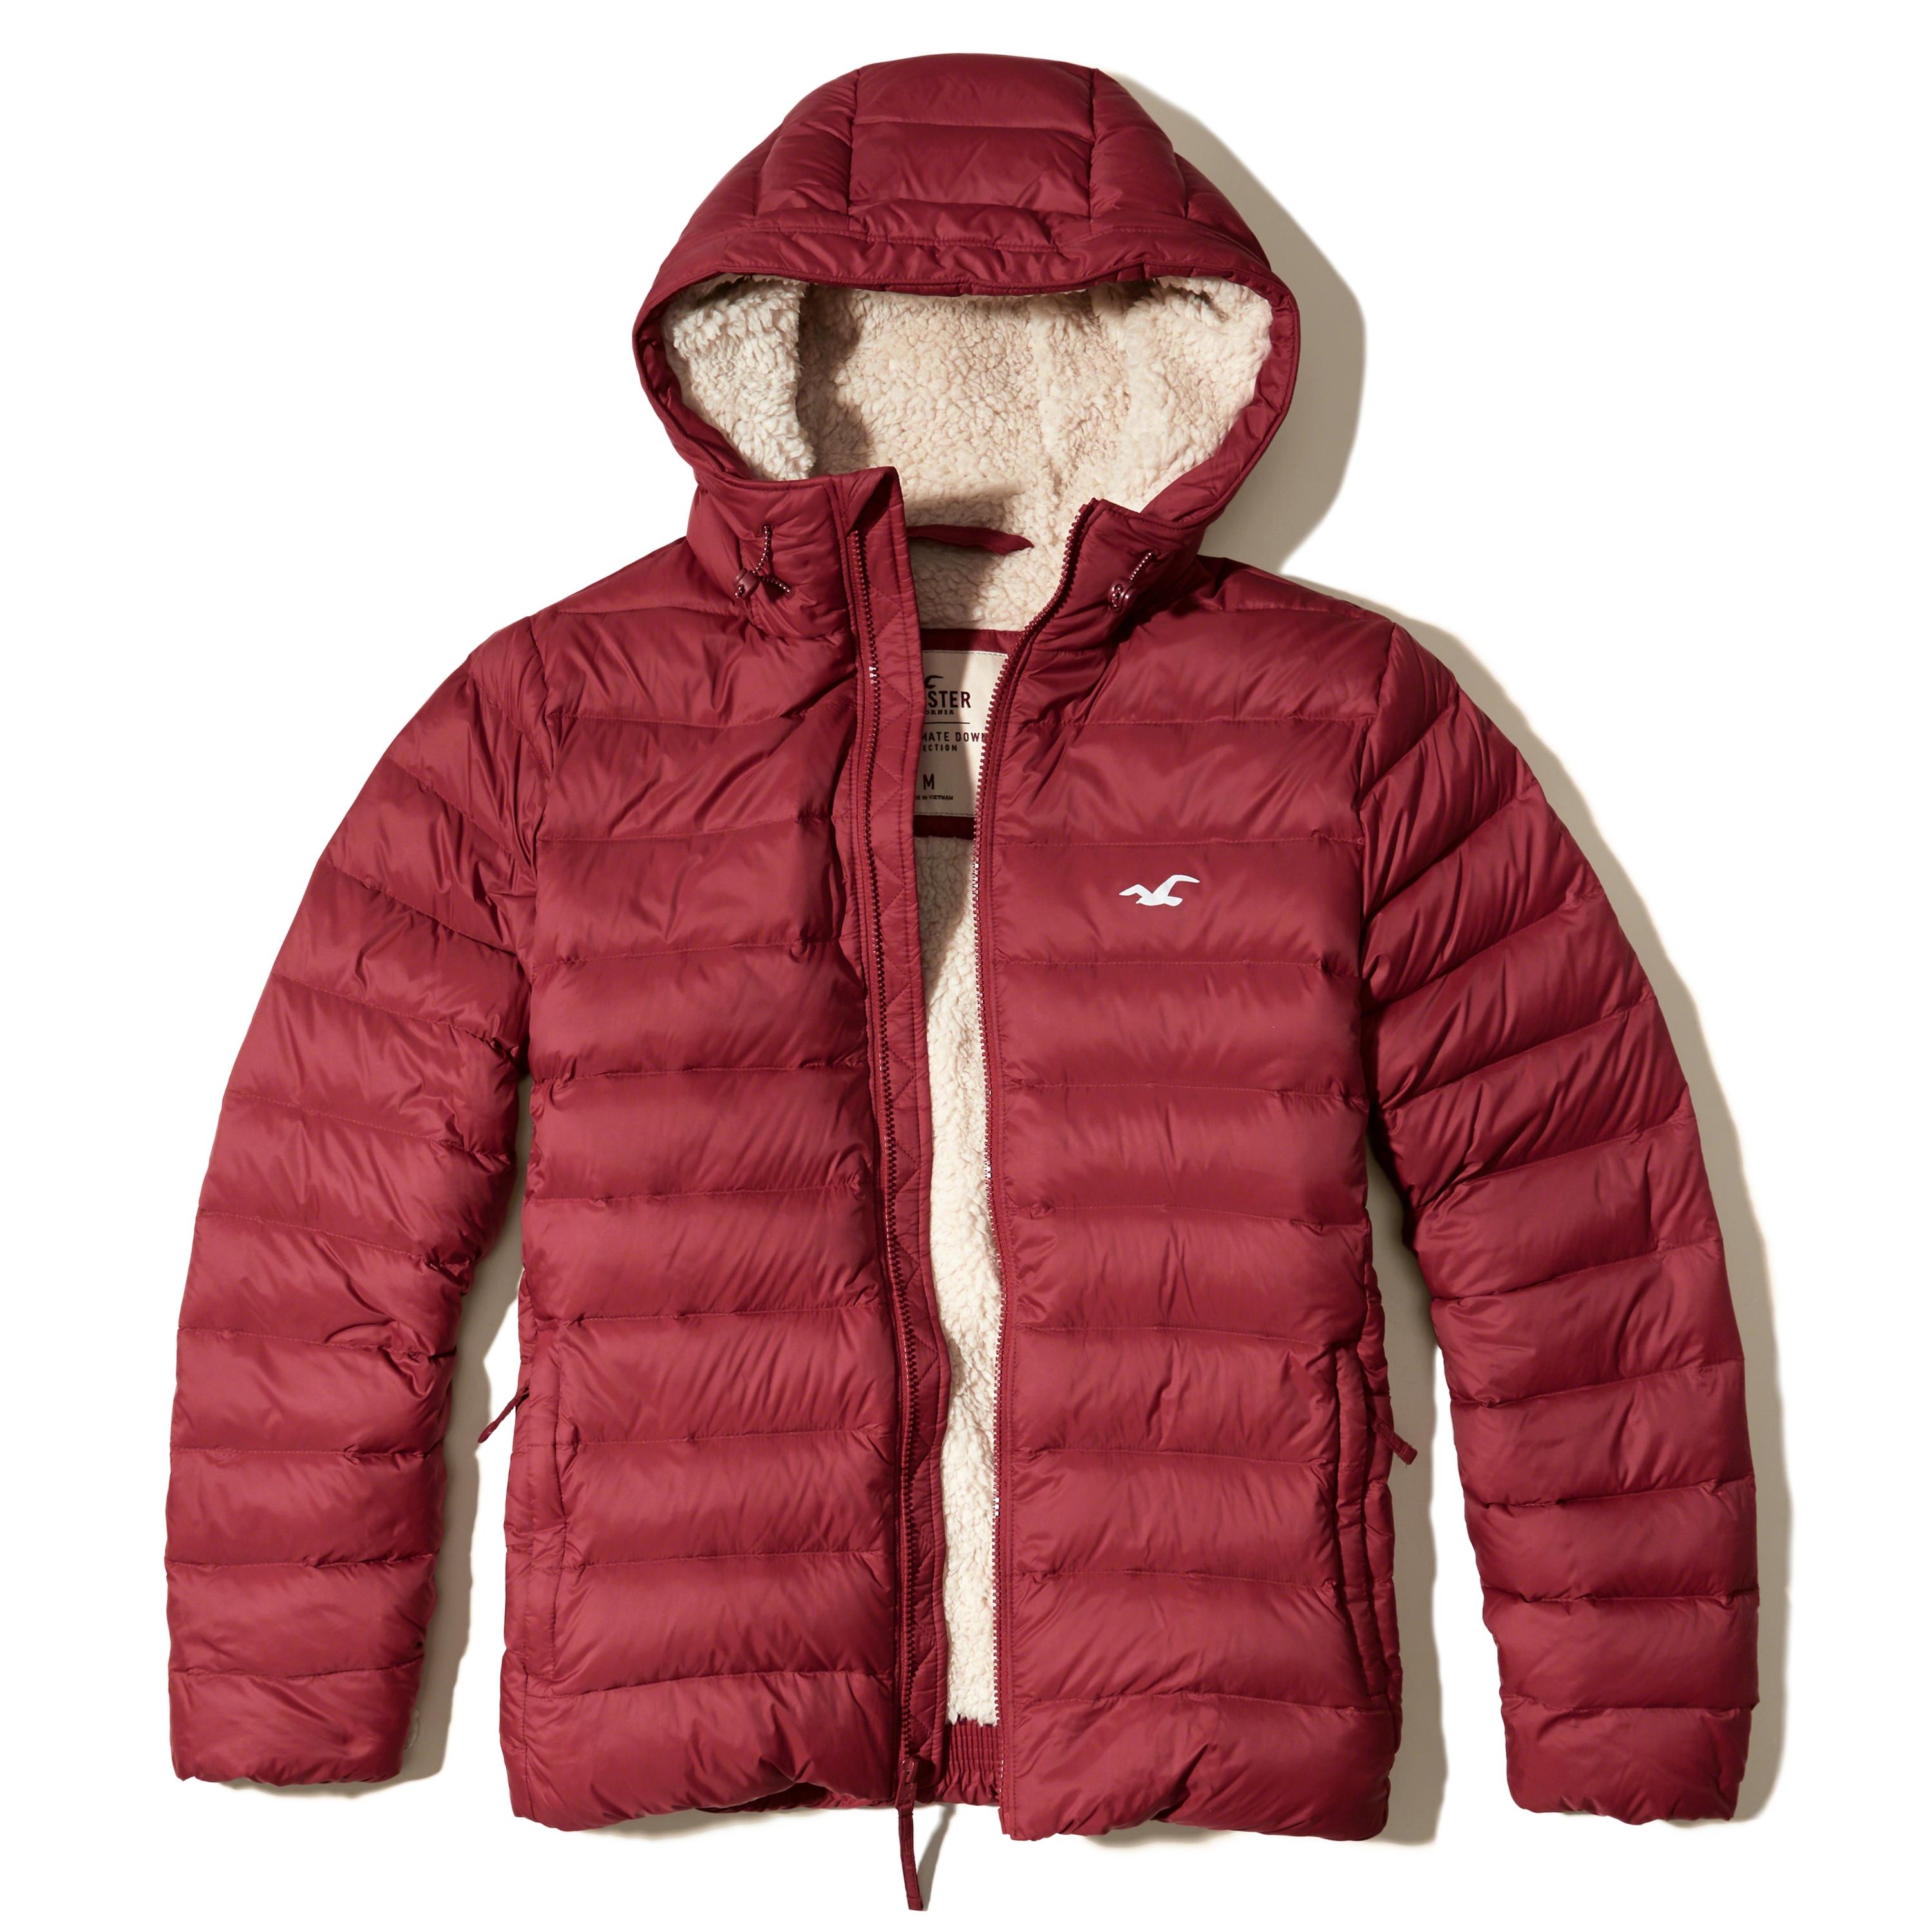 Hollister Synthetic Sherpa Lined Down Puffer Jacket in Red for Men - Lyst